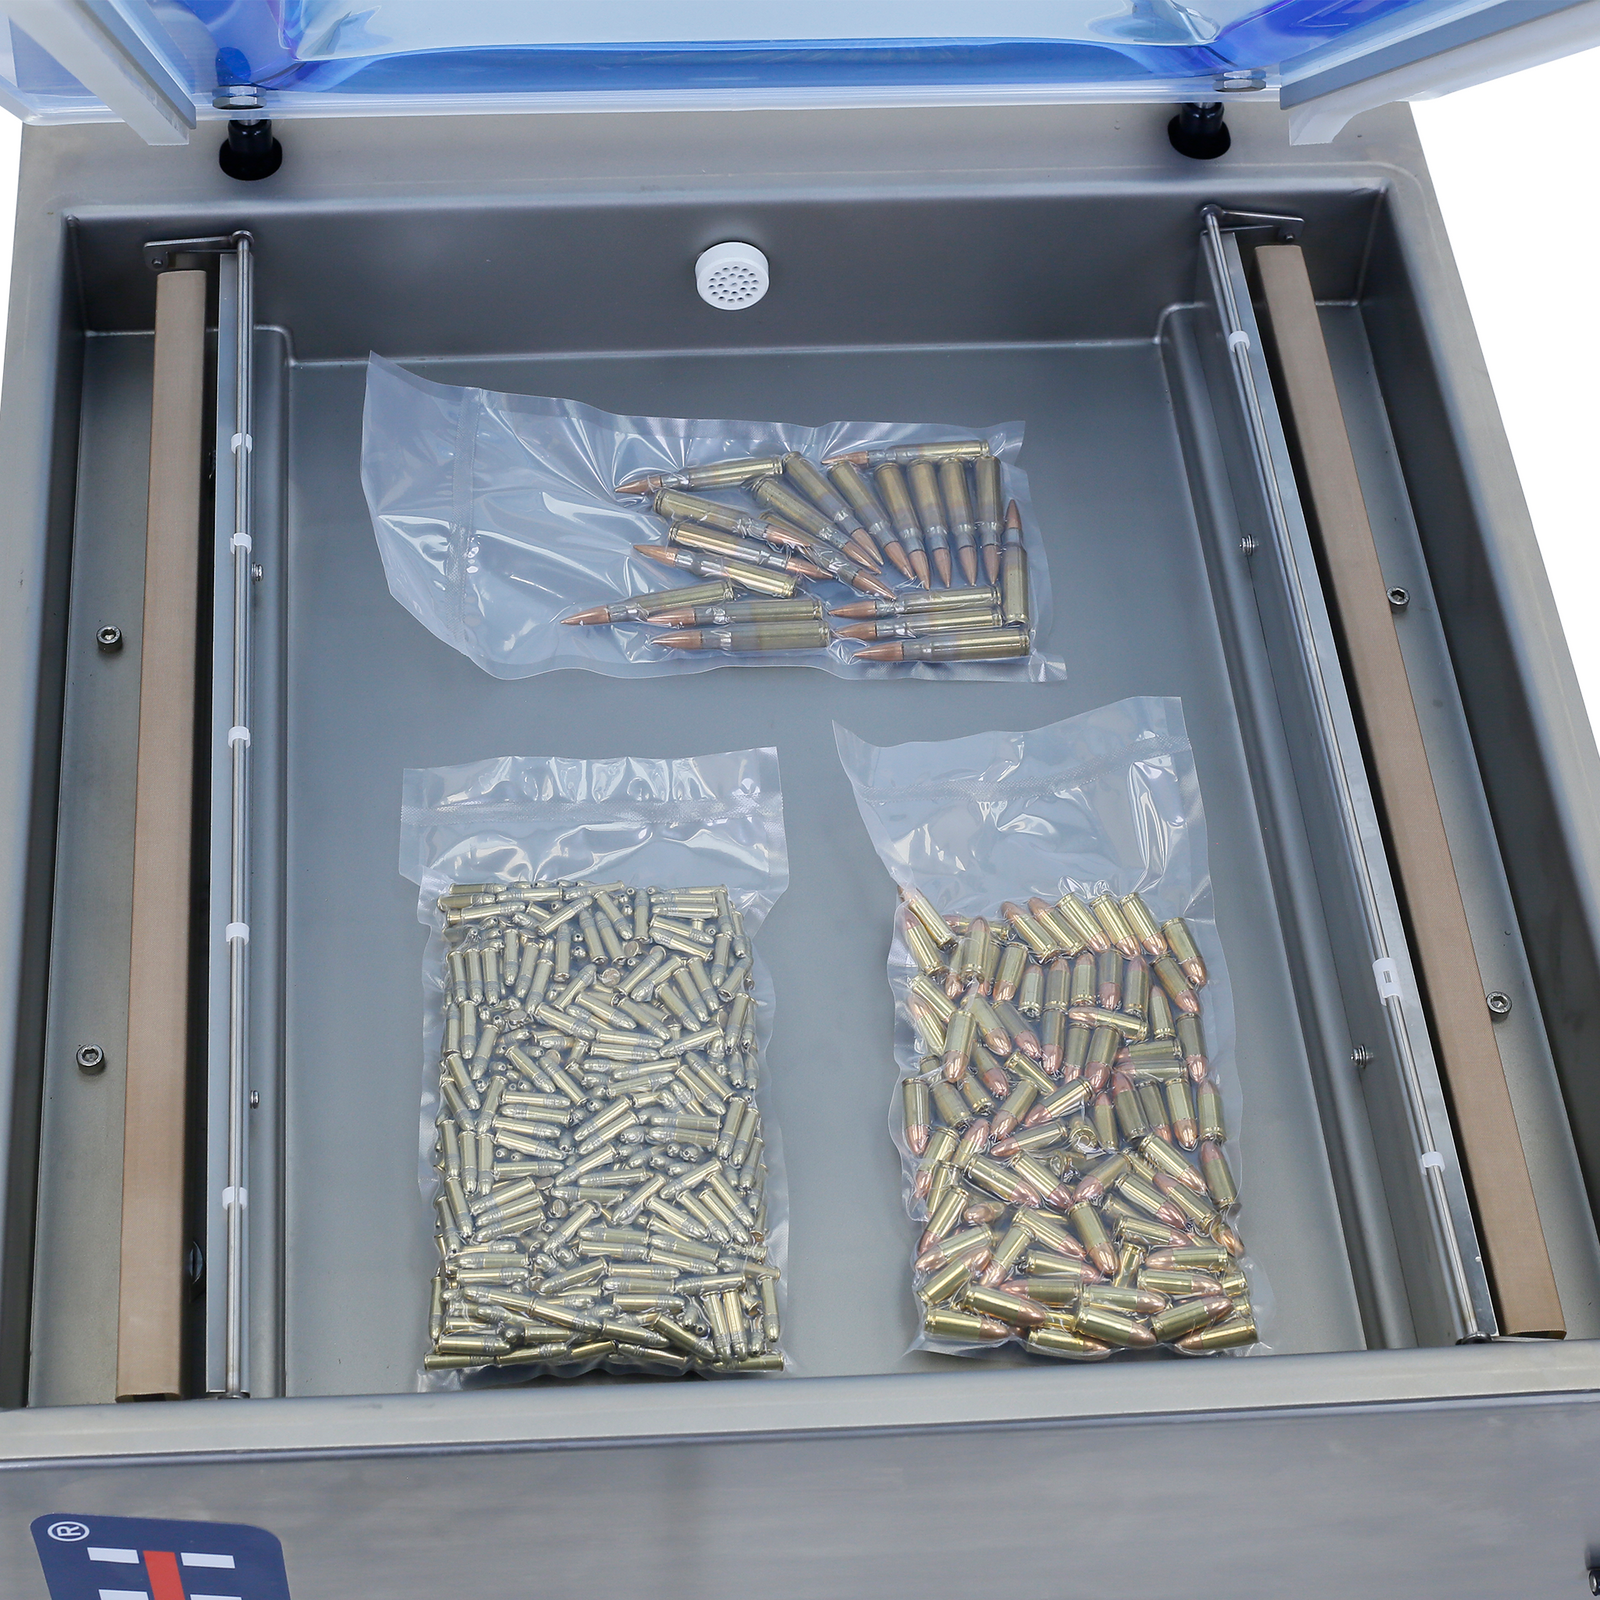 The interior of the chamber of the Jorestech vacuum sealer and the 2 sealing bars. Inside the chamber are 3 bags with metal items completely vacuumed to avoid weather exposure and oxidation. Metals are usually vacuumed to protect them from getting rusted